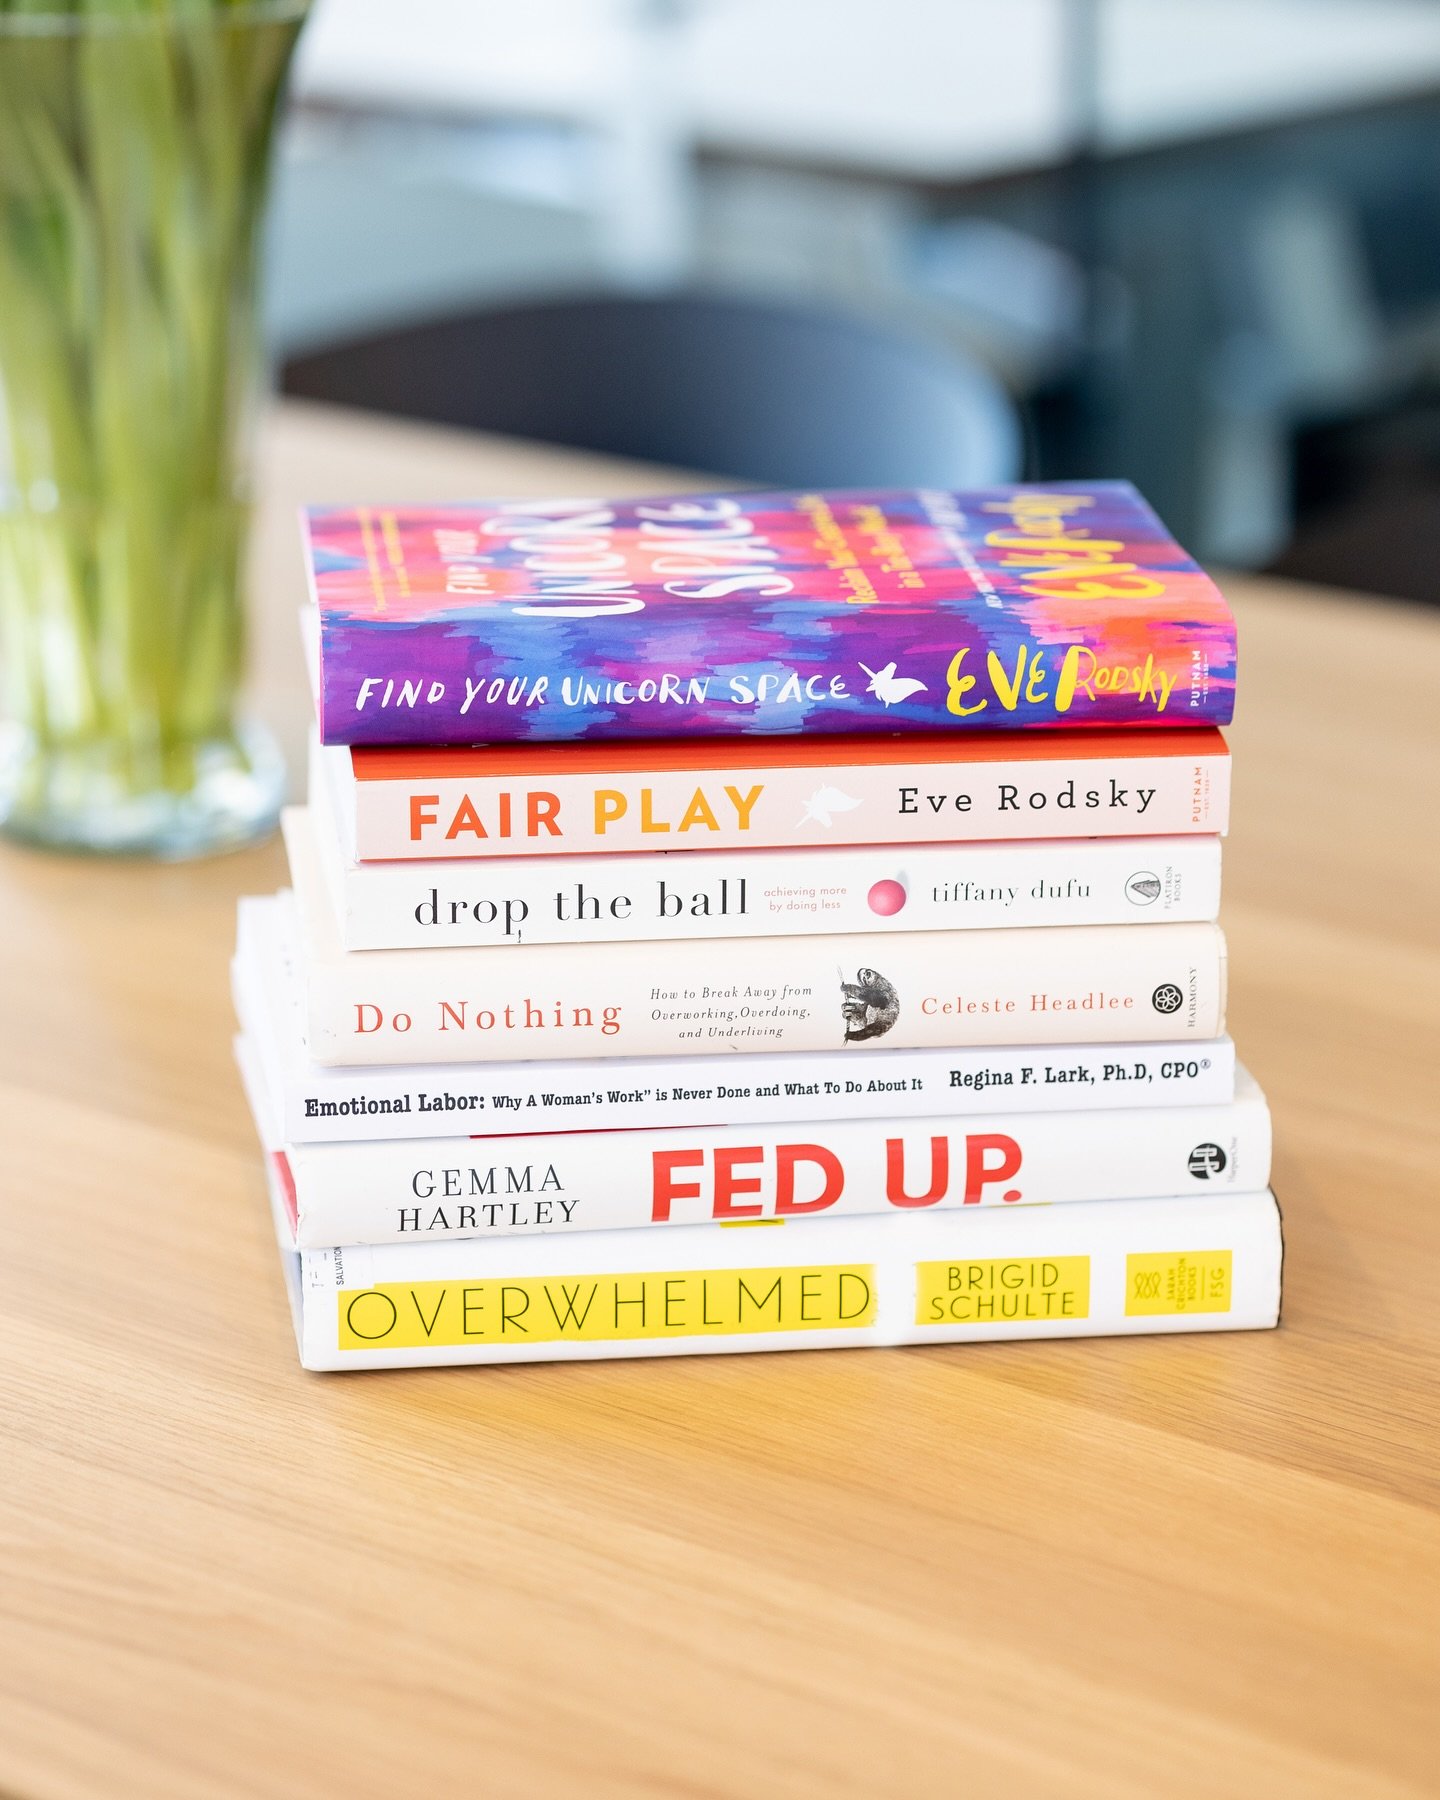 Occasionally, folks will ask me when I&rsquo;m writing a book. Perhaps I will one day&hellip; Until then for #worldbookday, I&rsquo;d like to lift up a few of my top reads on the intersection of home life and the critical value of care.

📚 Our Home: